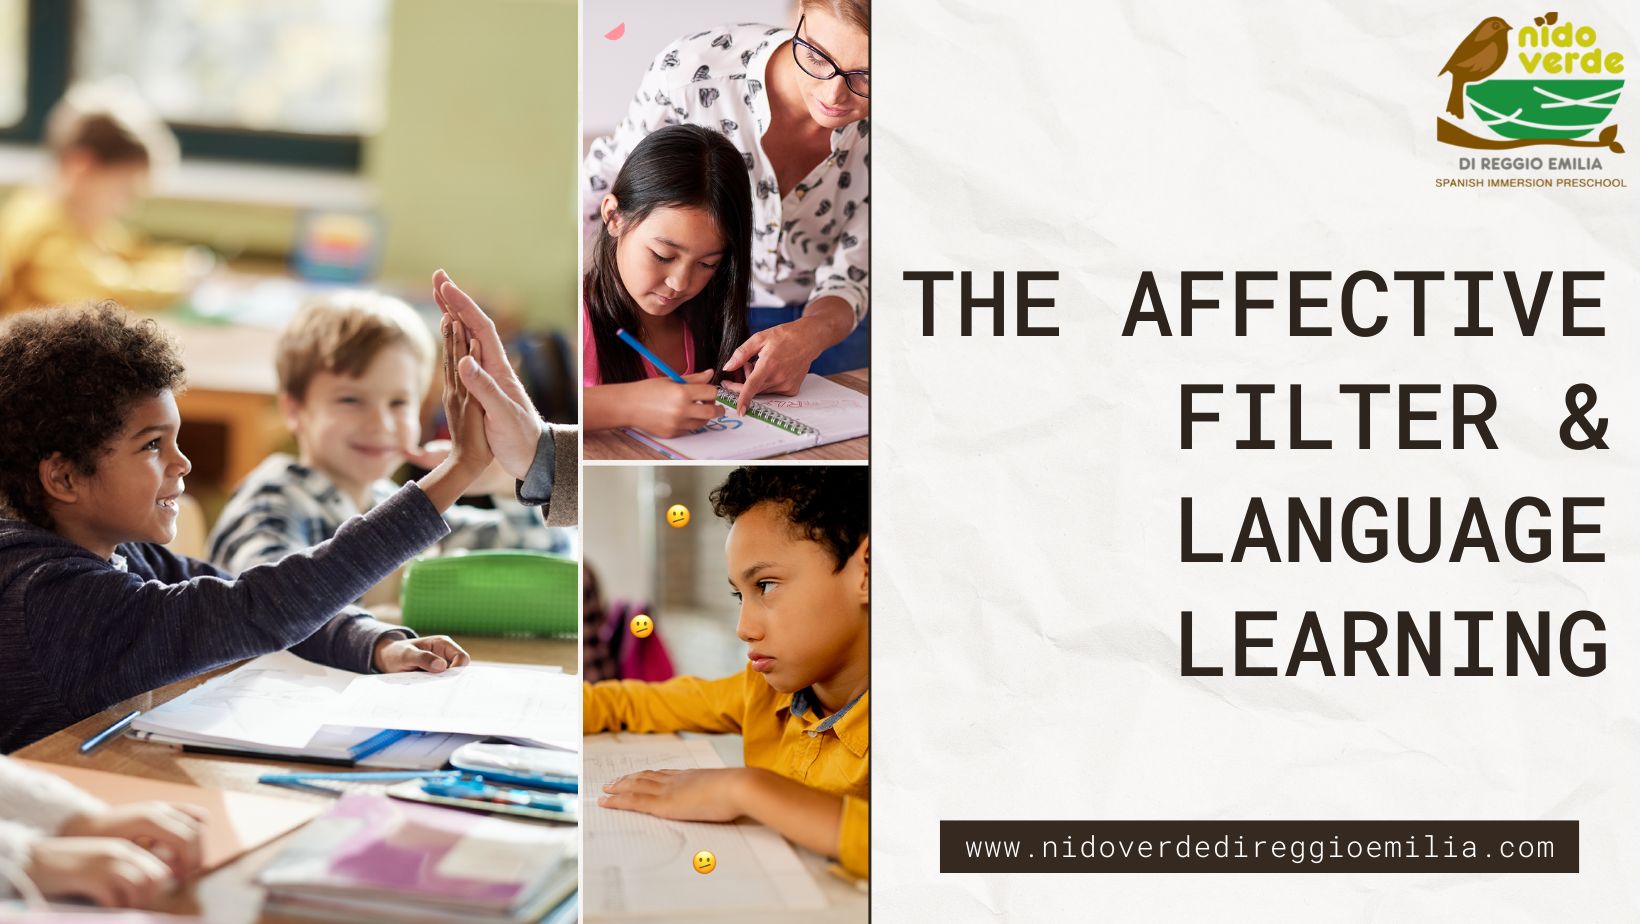 The Affective Filter & Language Learning